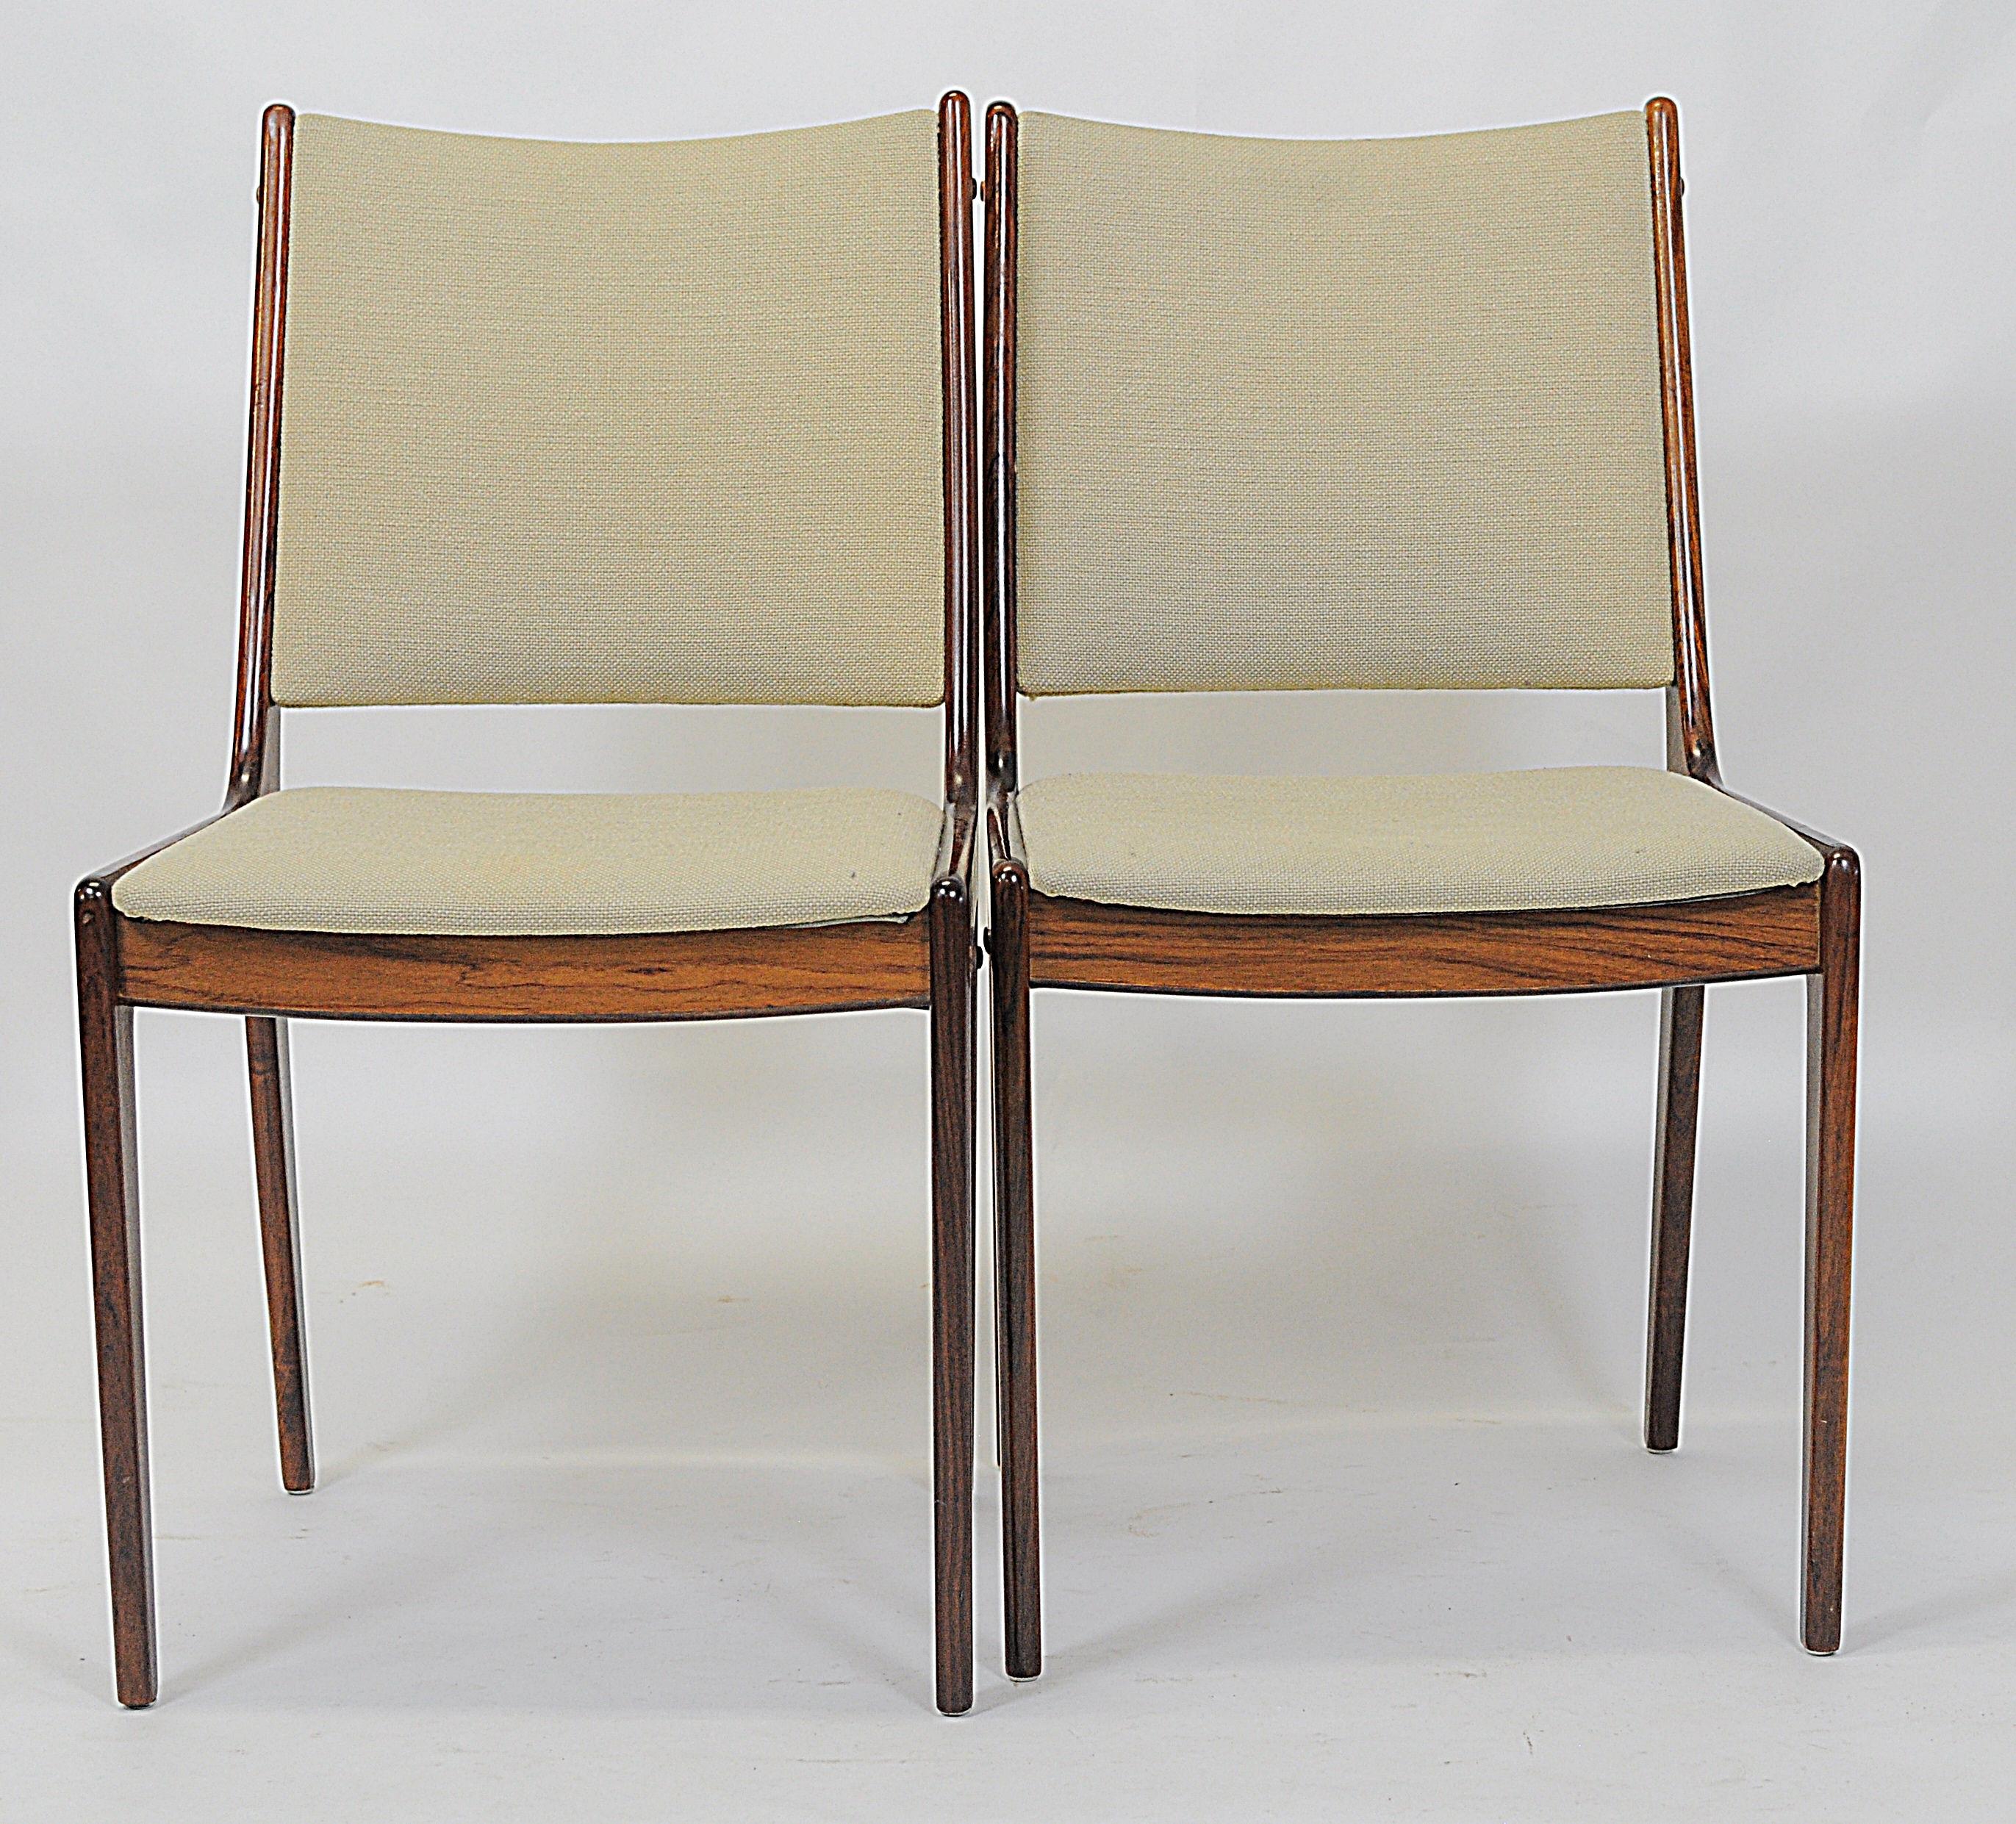 Set of 8 1960s Johannes Andersen dining chairs in rosewood made by Uldum Møbler, Denmark.

The set of dining chairs feature a clean simple yet elegant design that will fit in well in most houses. 

The chairs have been restored and refinished by our